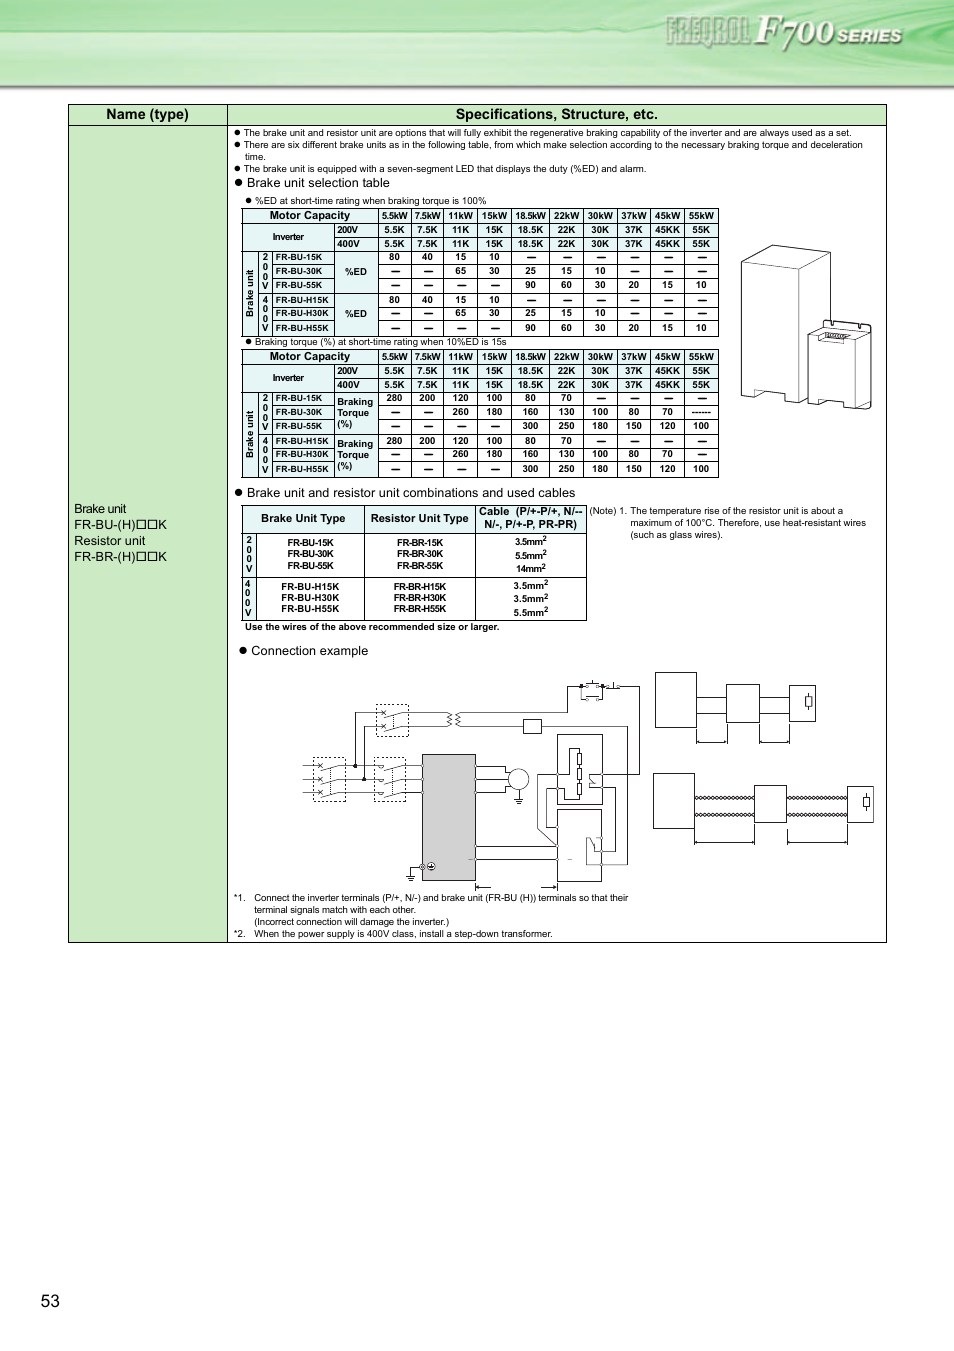 Name (type) specifications, structure, etc | MITSUBISHI ELECTRIC INVERTER  FR-F700 User Manual | Page 52 / 65 | Original mode